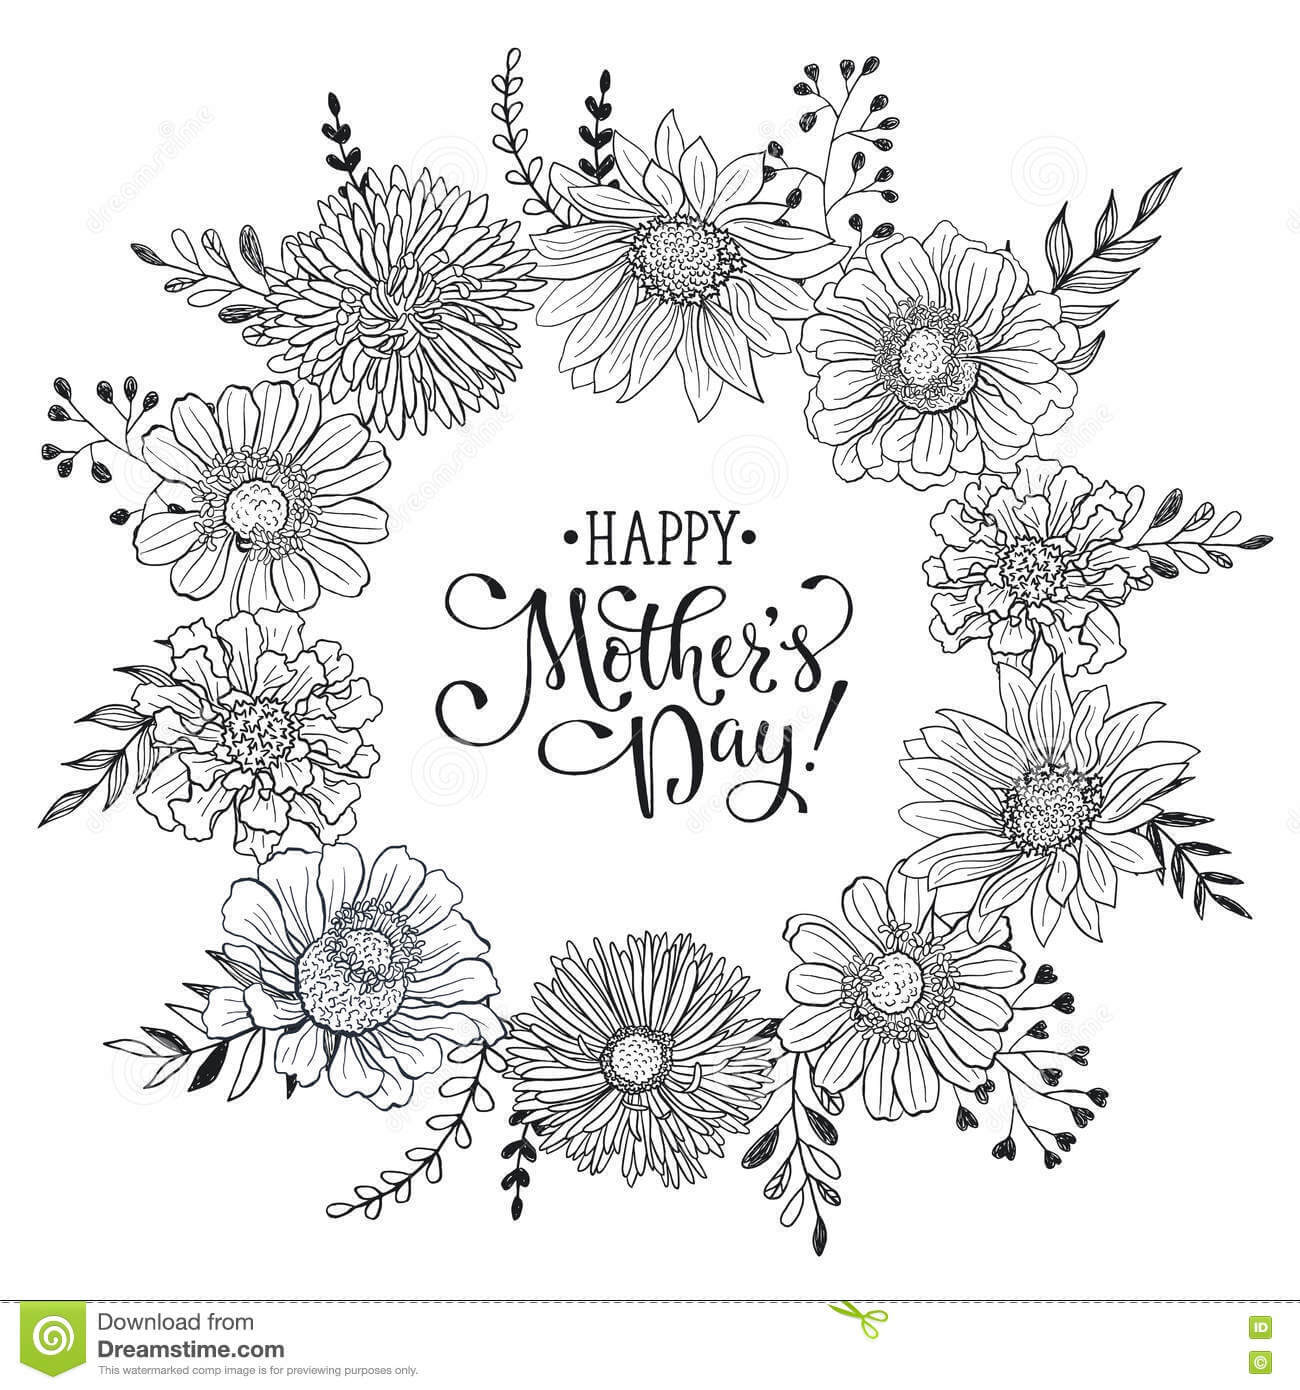 Mother's Day Card Stock Vector. Illustration Of Monochrome With Mothers Day Card Templates